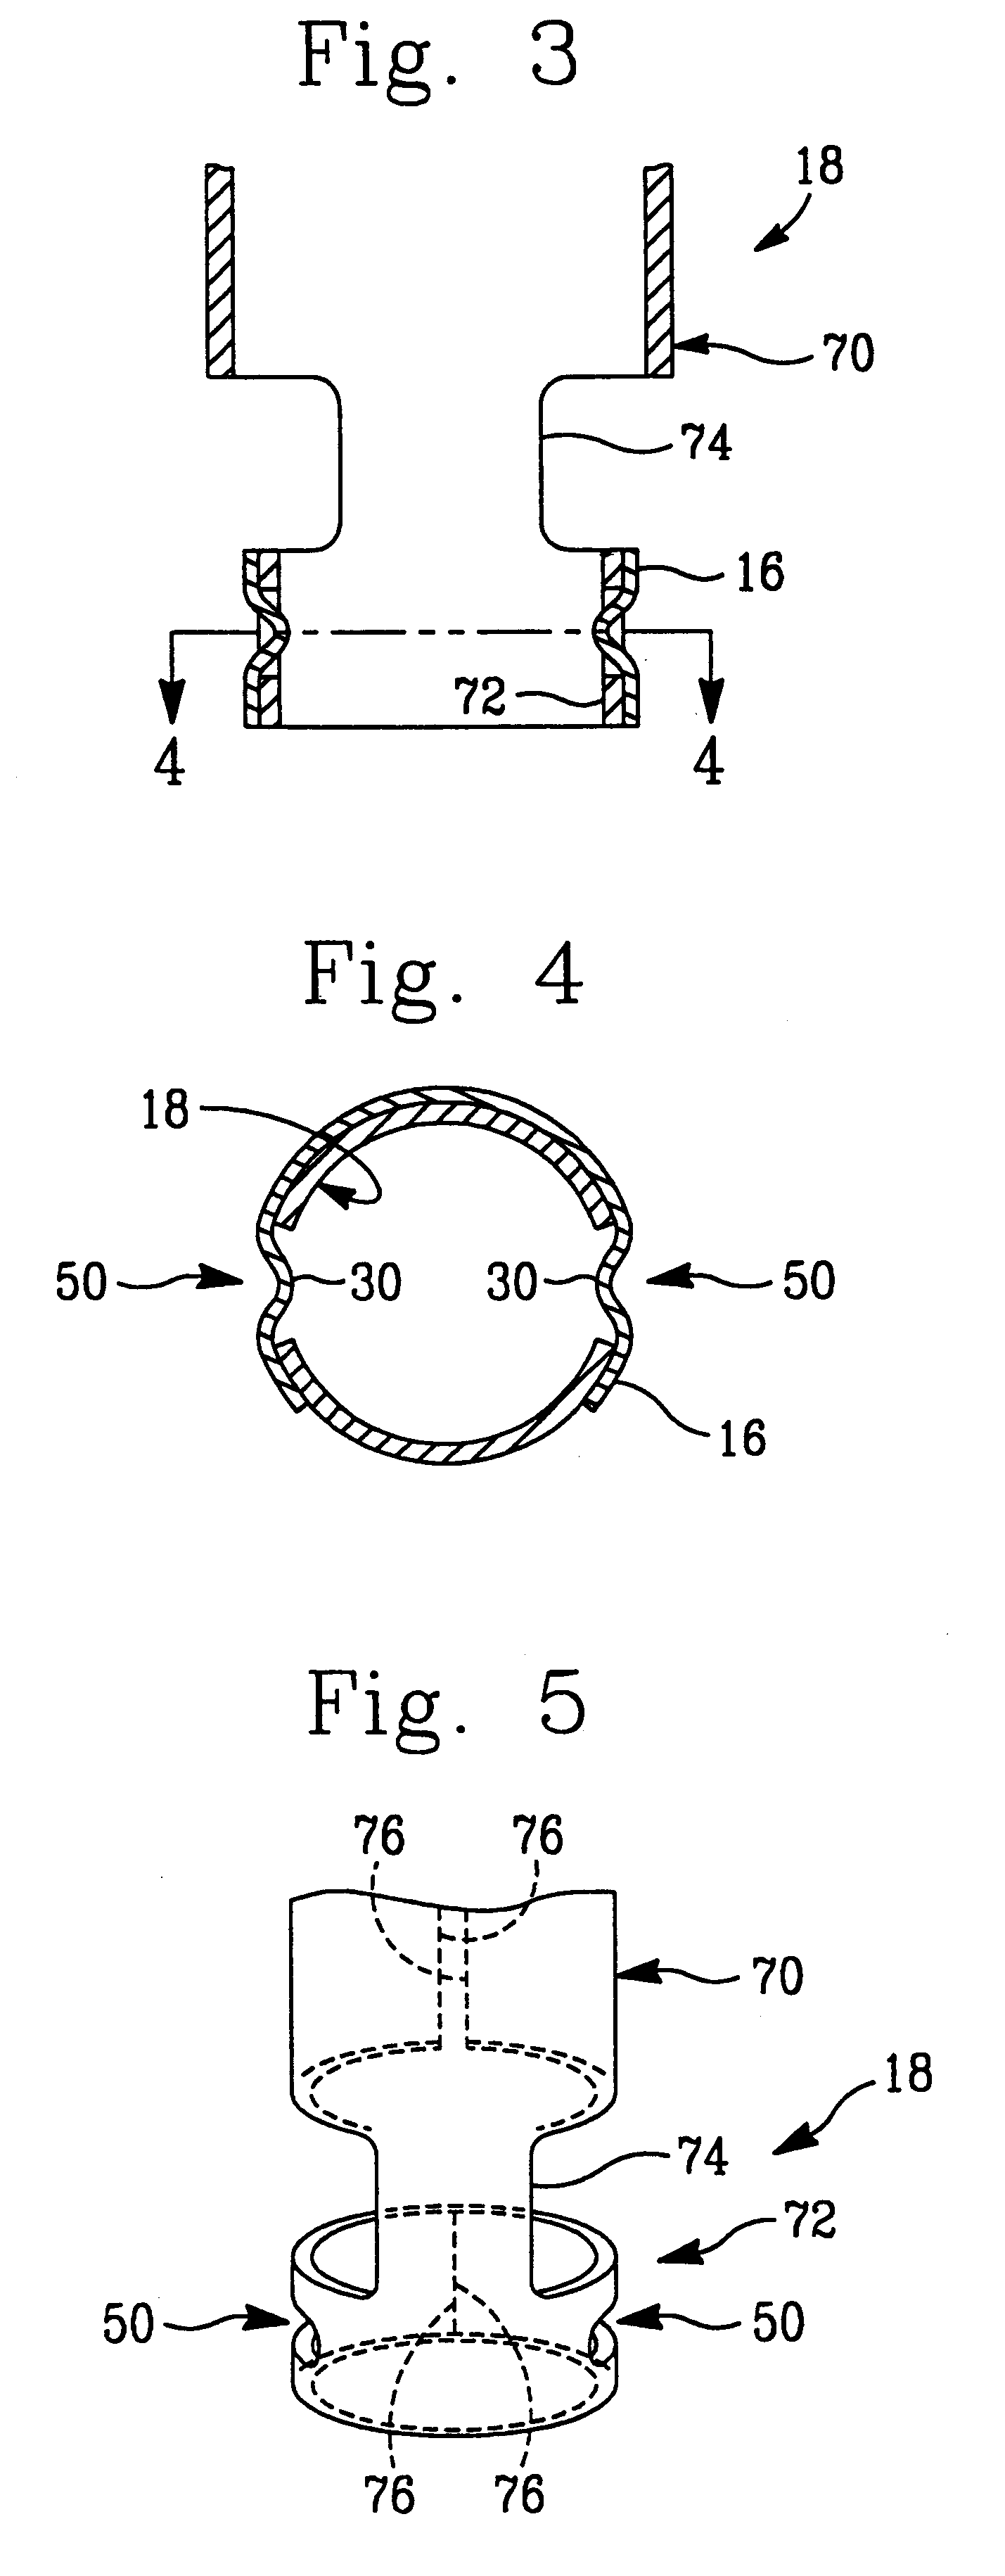 Shield and spring interface to a spark plug from a pencil coil